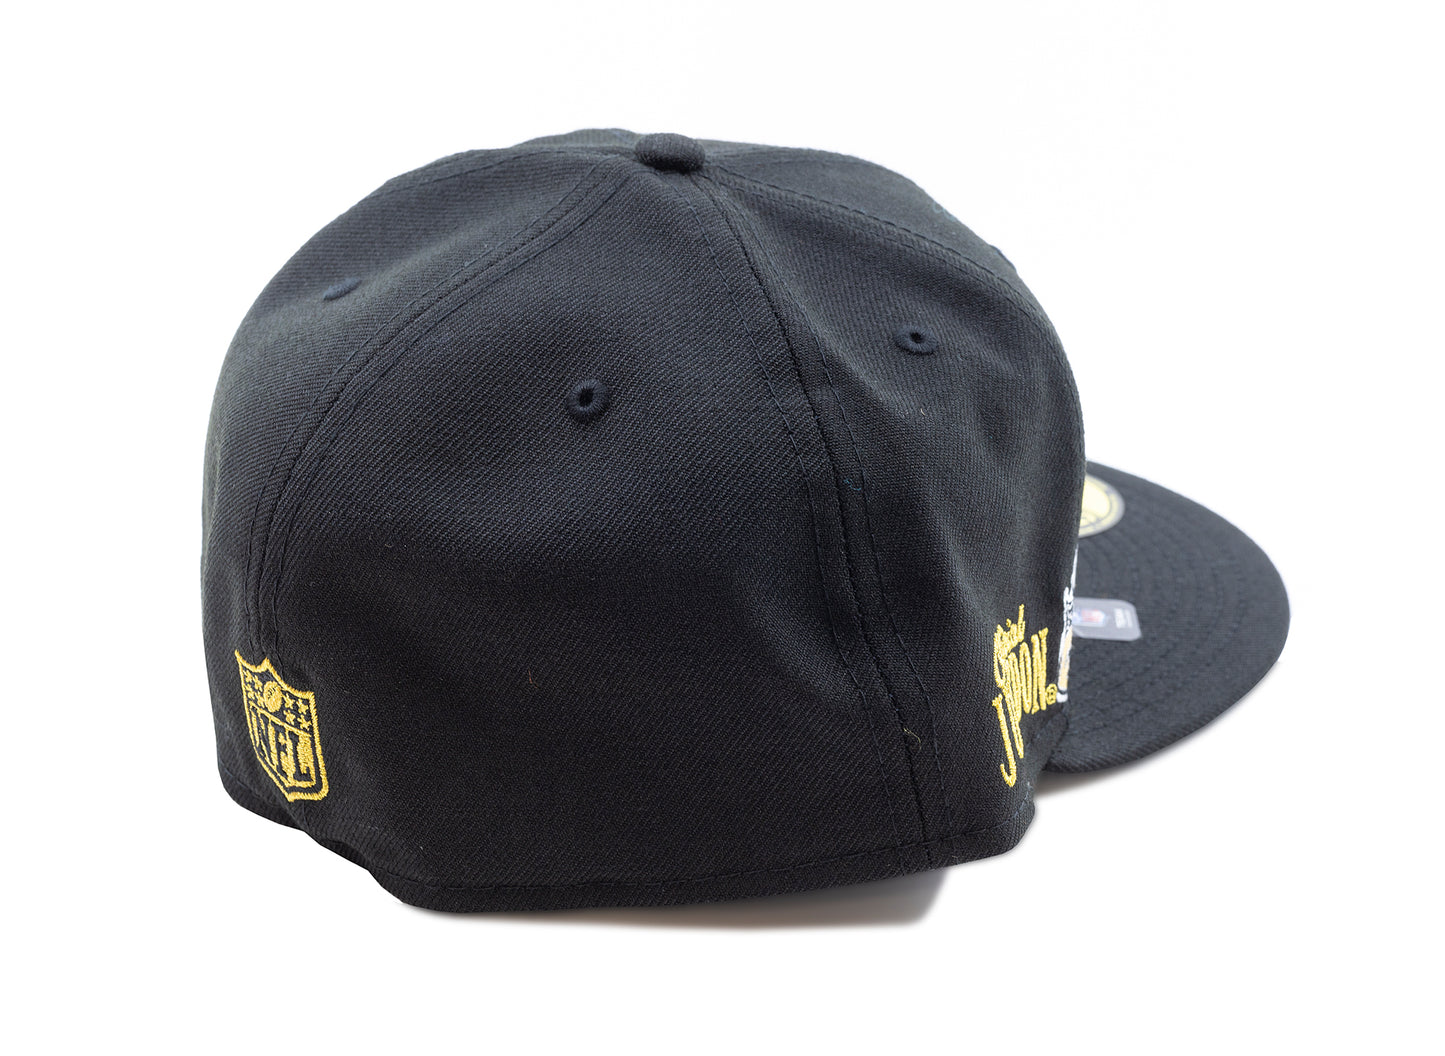 New Era x Just Don 59FIFTY New Orleans Saints Hat